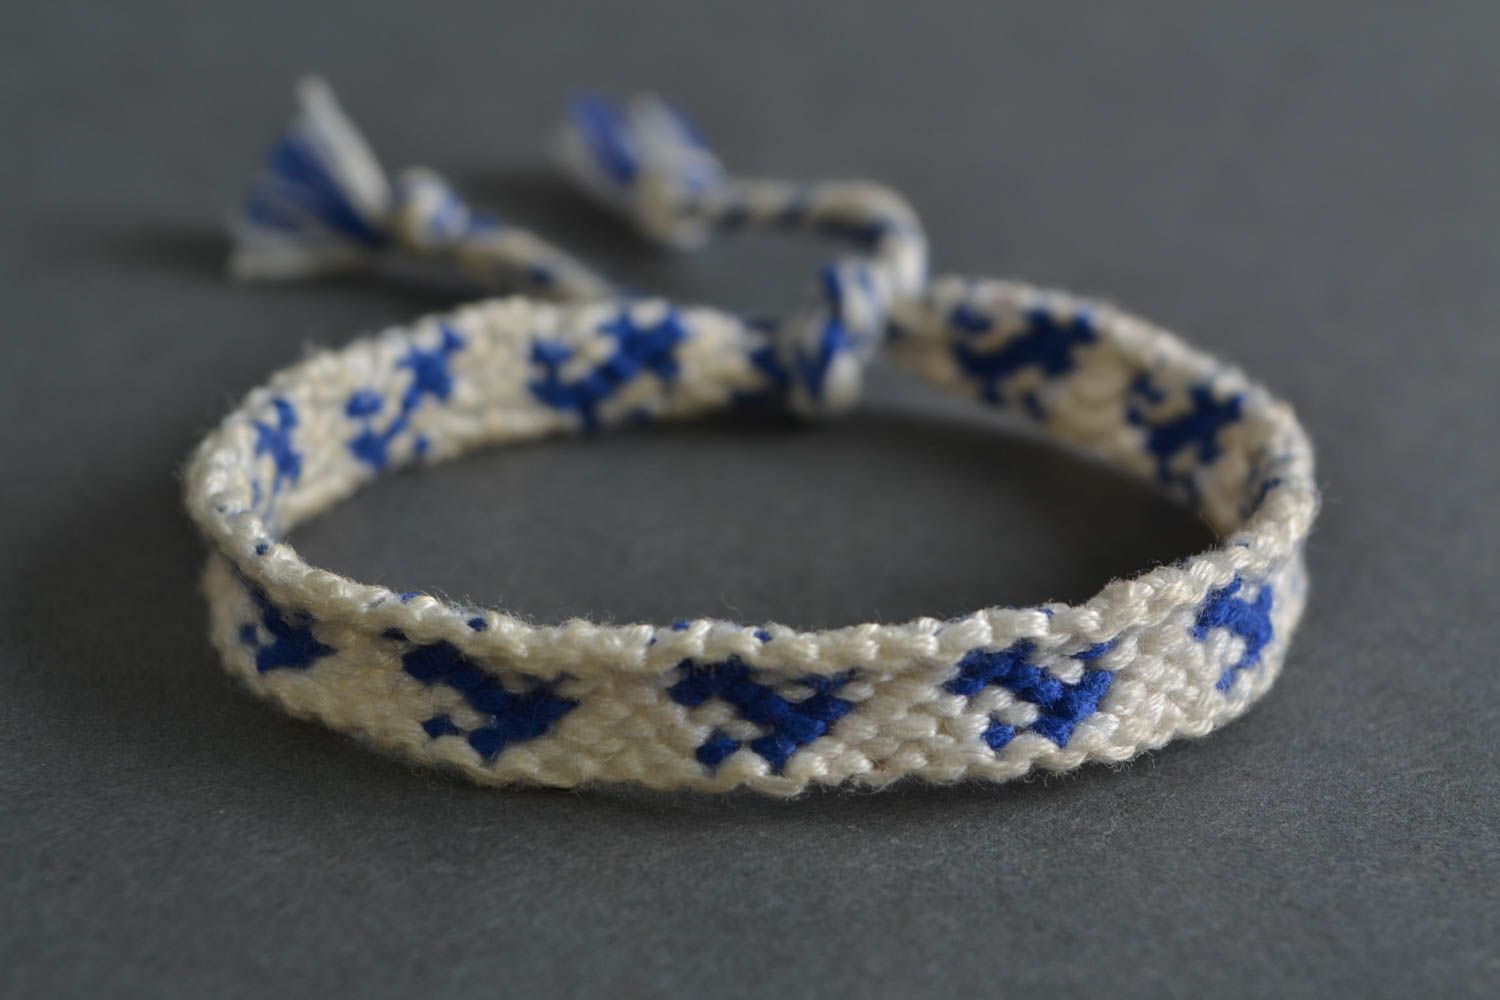 Handmade thin white and blue friendship wrist bracelet woven of threads with tie photo 1